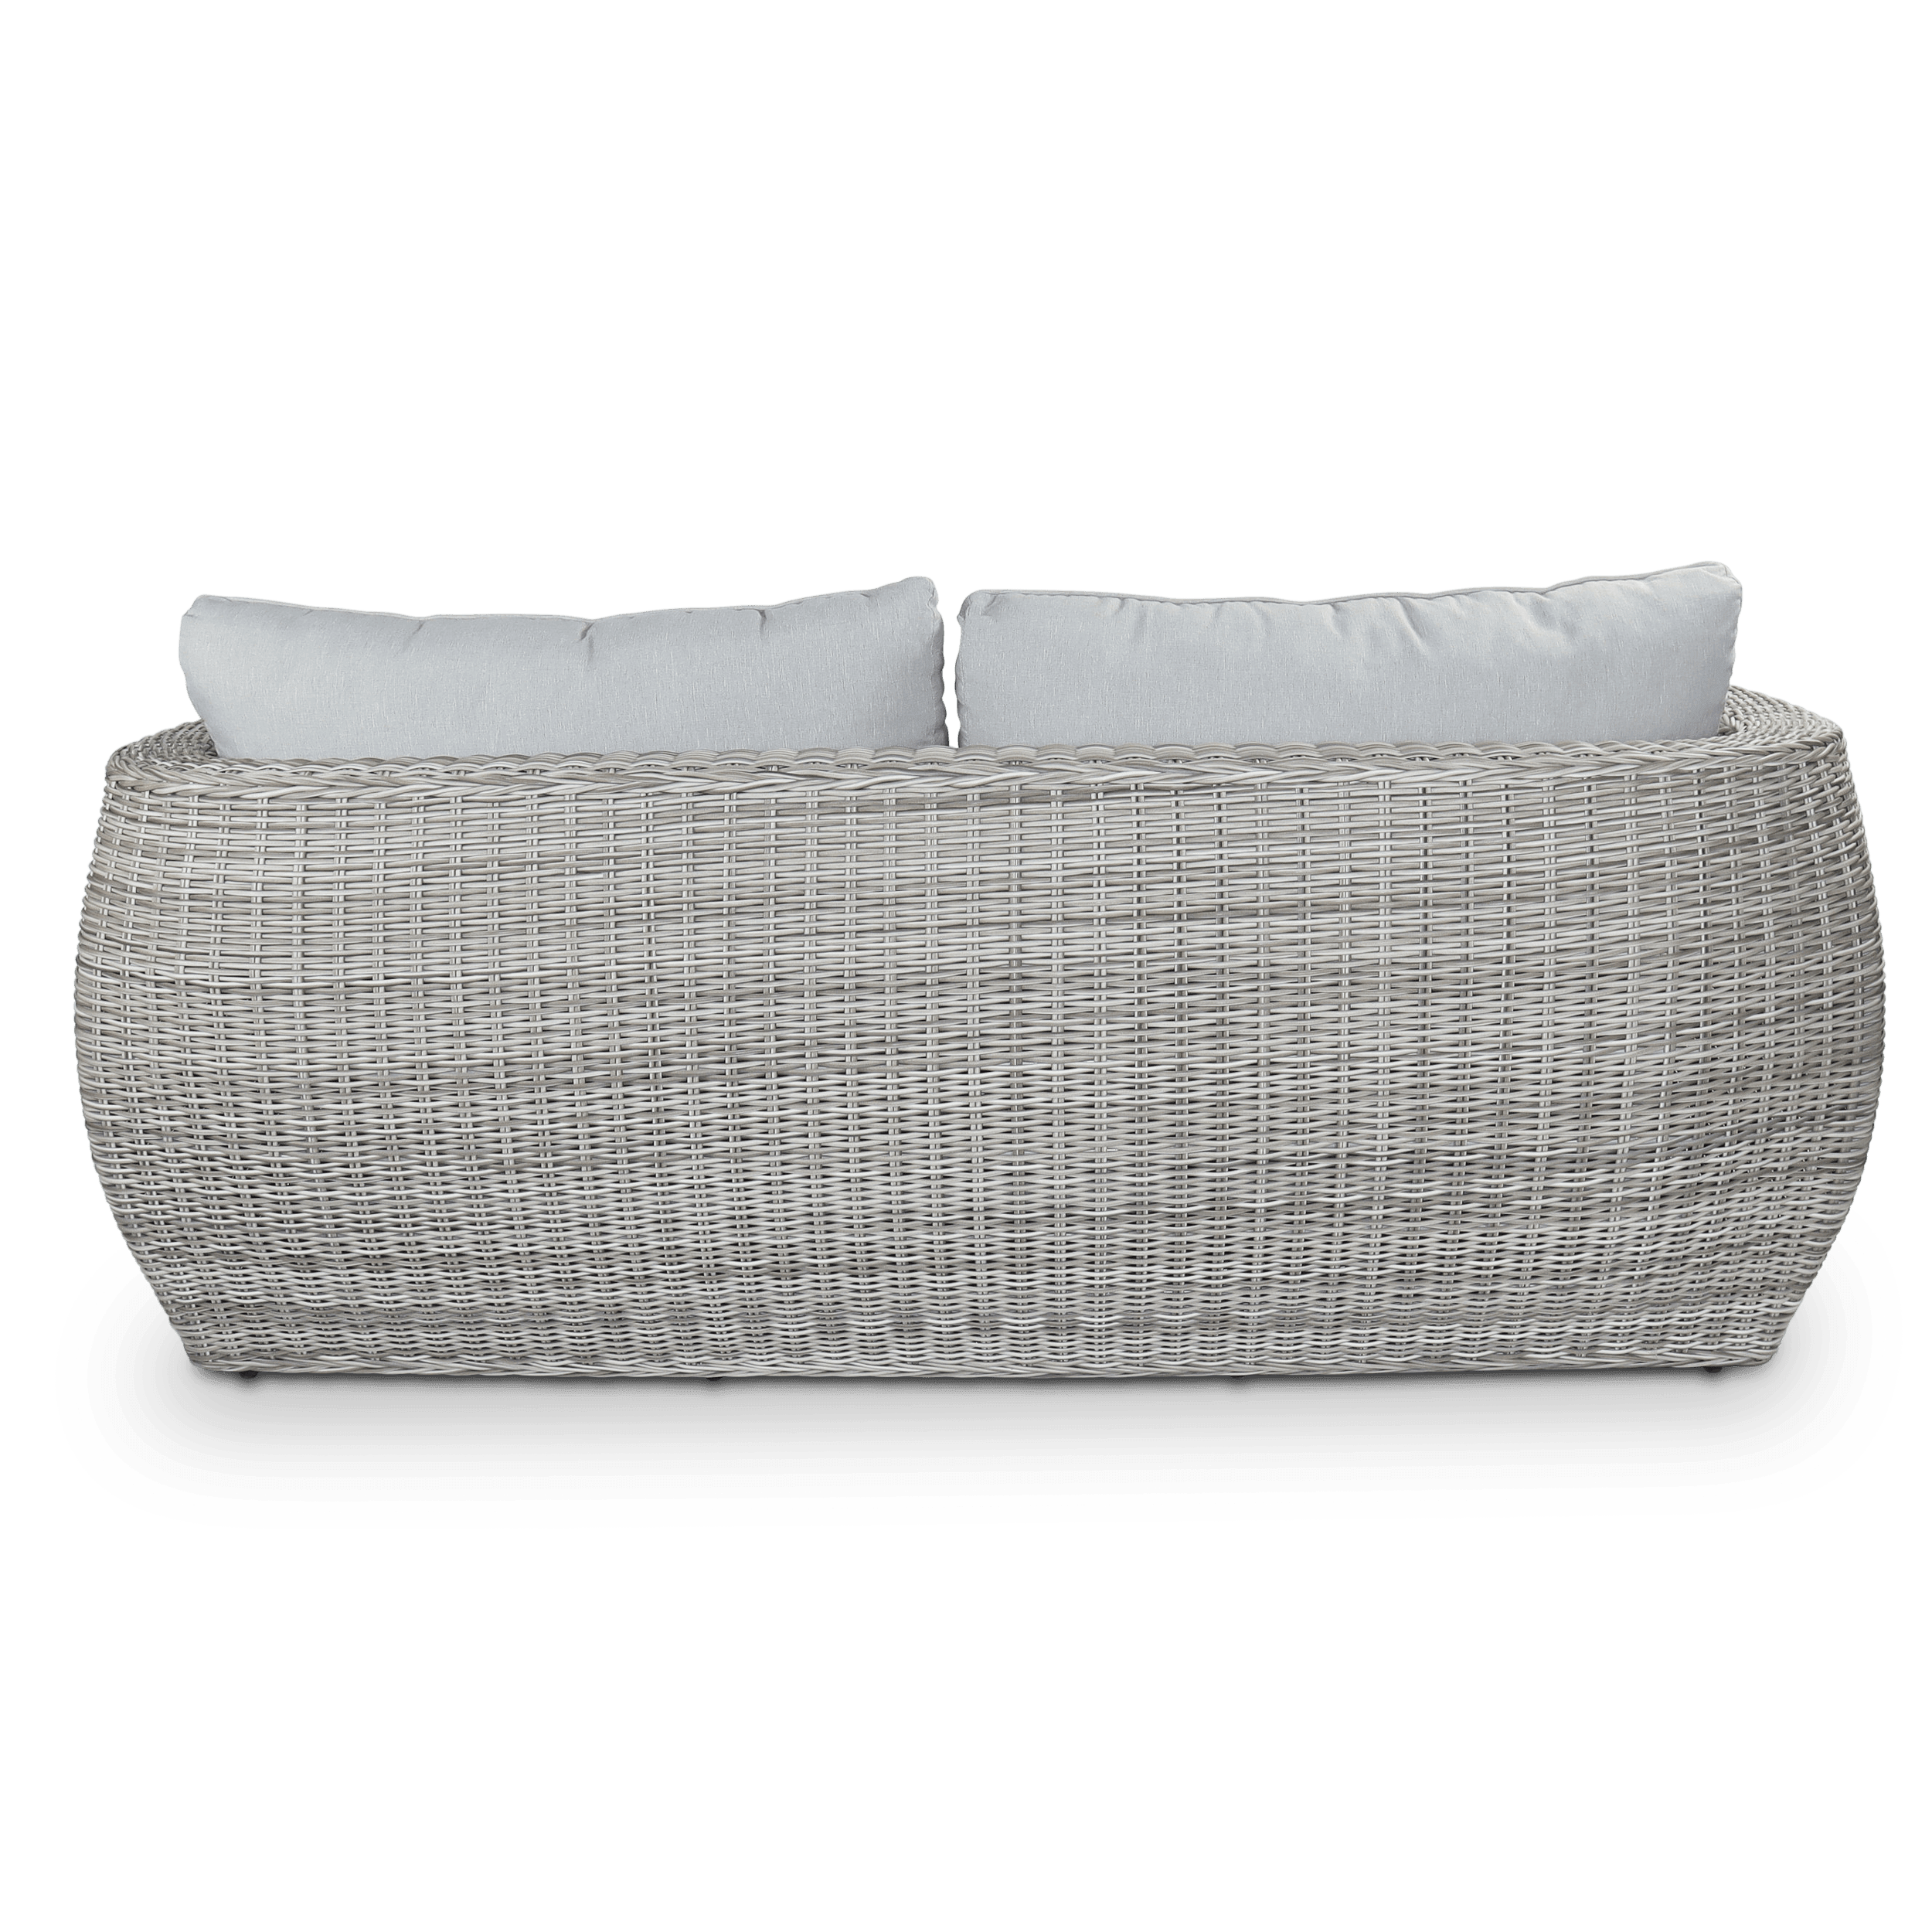 Sienna 3 Seater in Kubu Grey Synthetic Viro Rattan and Mountain Ash Sunproof All Weather Fabric - The Furniture Shack